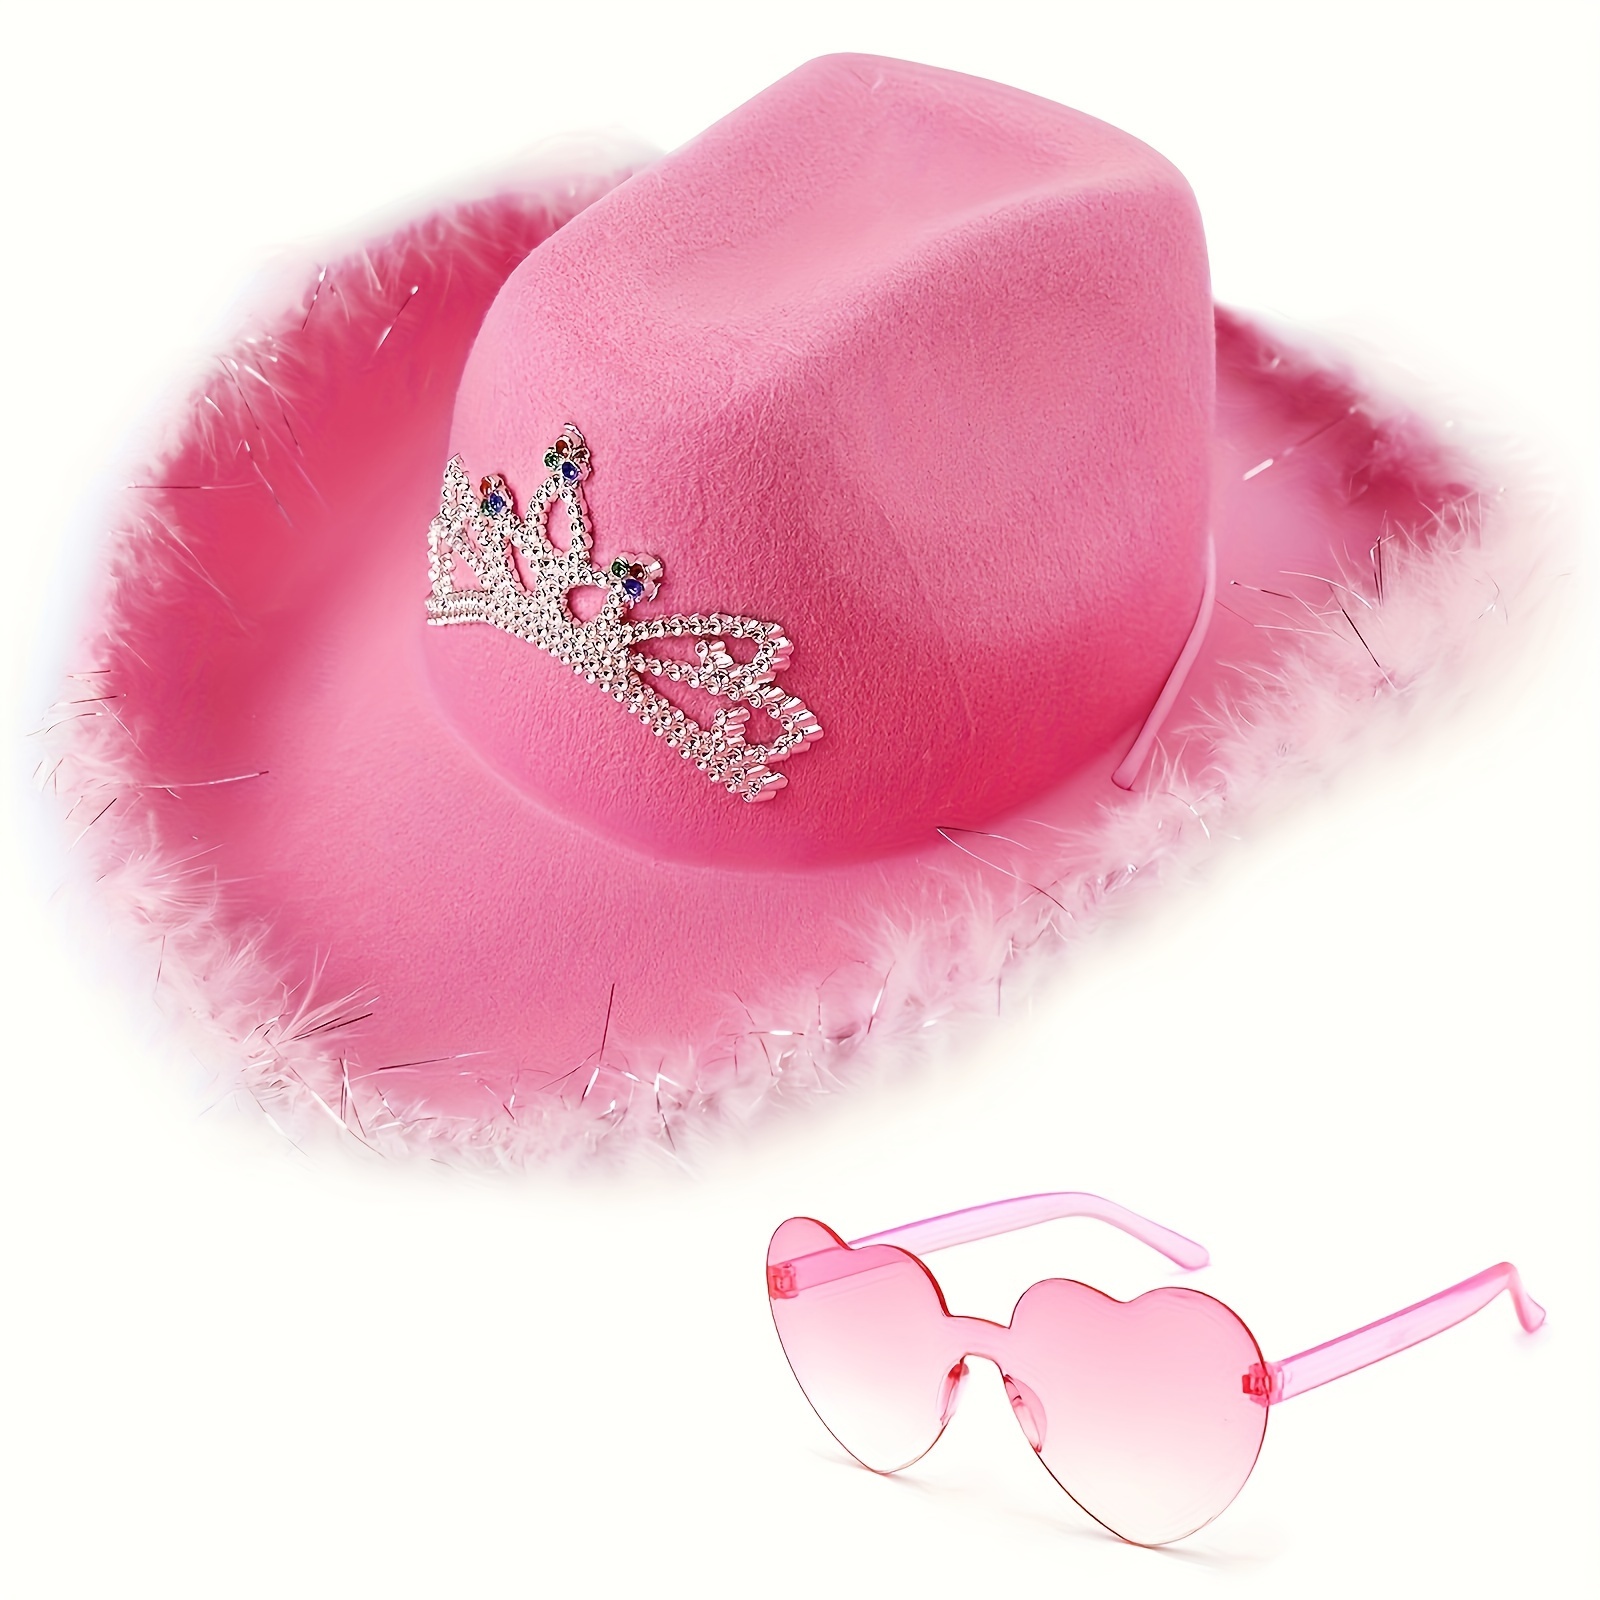 

Set, Pink Feather Cowboy Hat With Heart Shaped Party Glasses, Crown Tiara Cowgirl Hat, Birthday Bachelor Party Favor Headwear, Cool Stuff